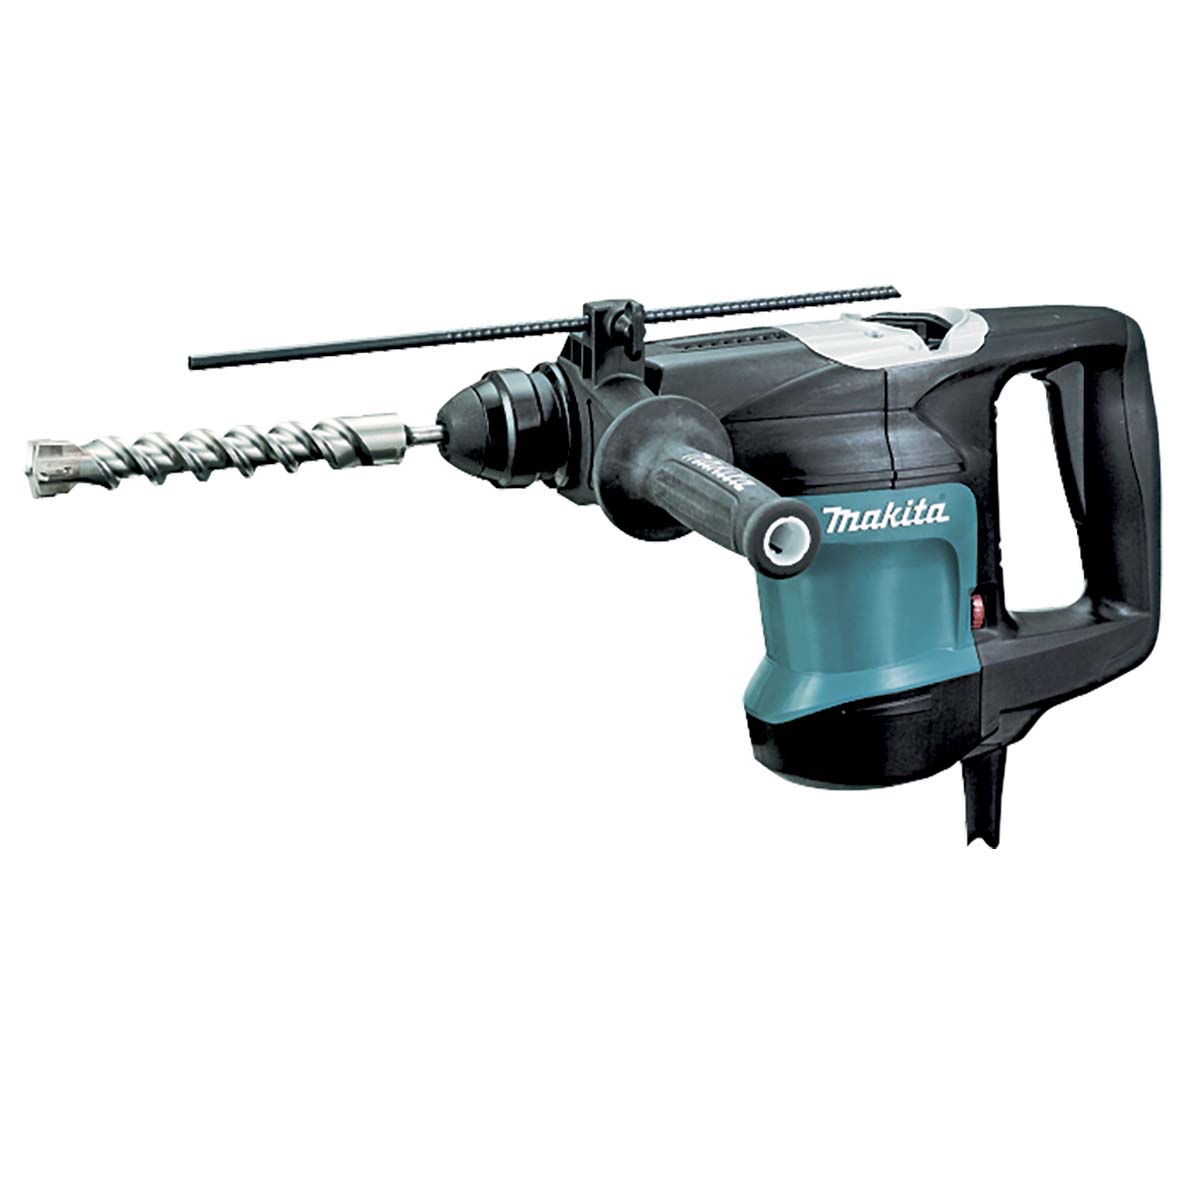 850W 32mm SDS-Plus Rotary Hammer HR3200C by Makita